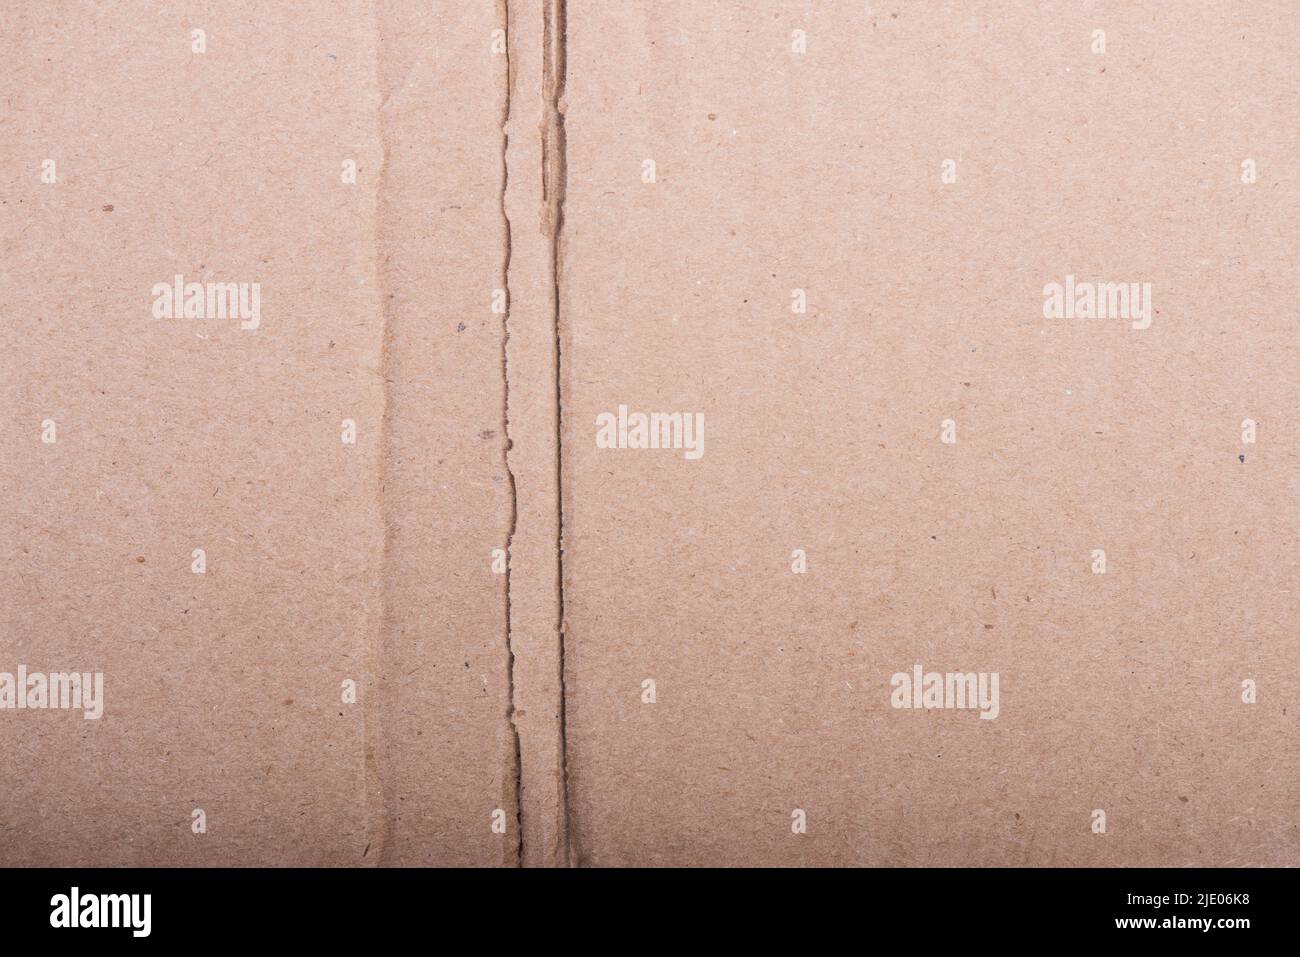 Paper texture, close up cardboard background Stock Photo